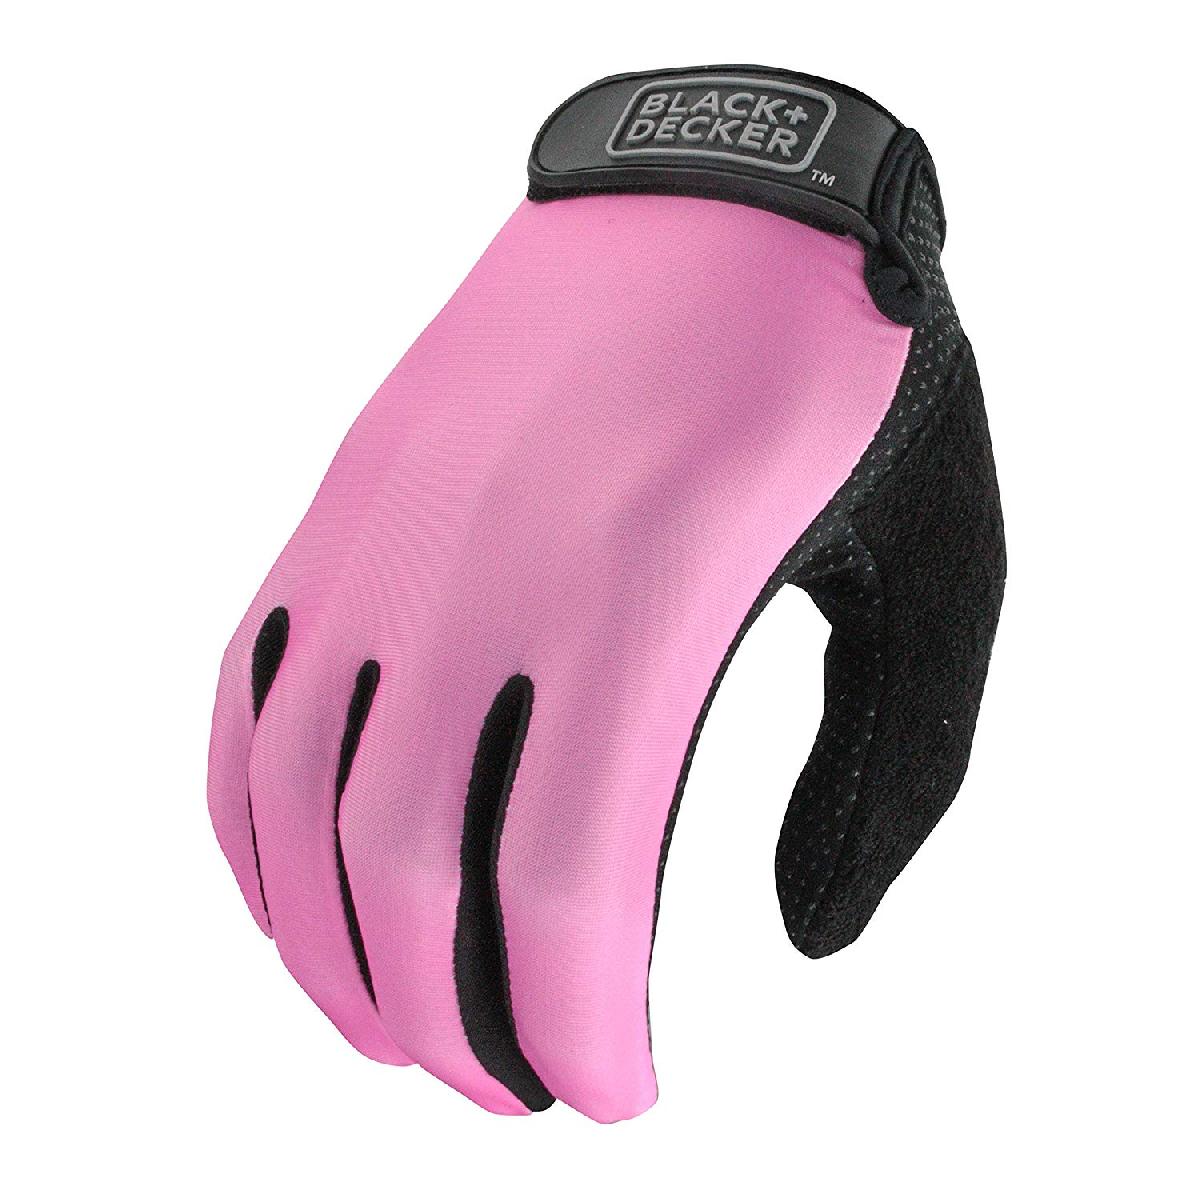 Black And Decker Ladies Large Pink High Dexterity All Purpose Glove 